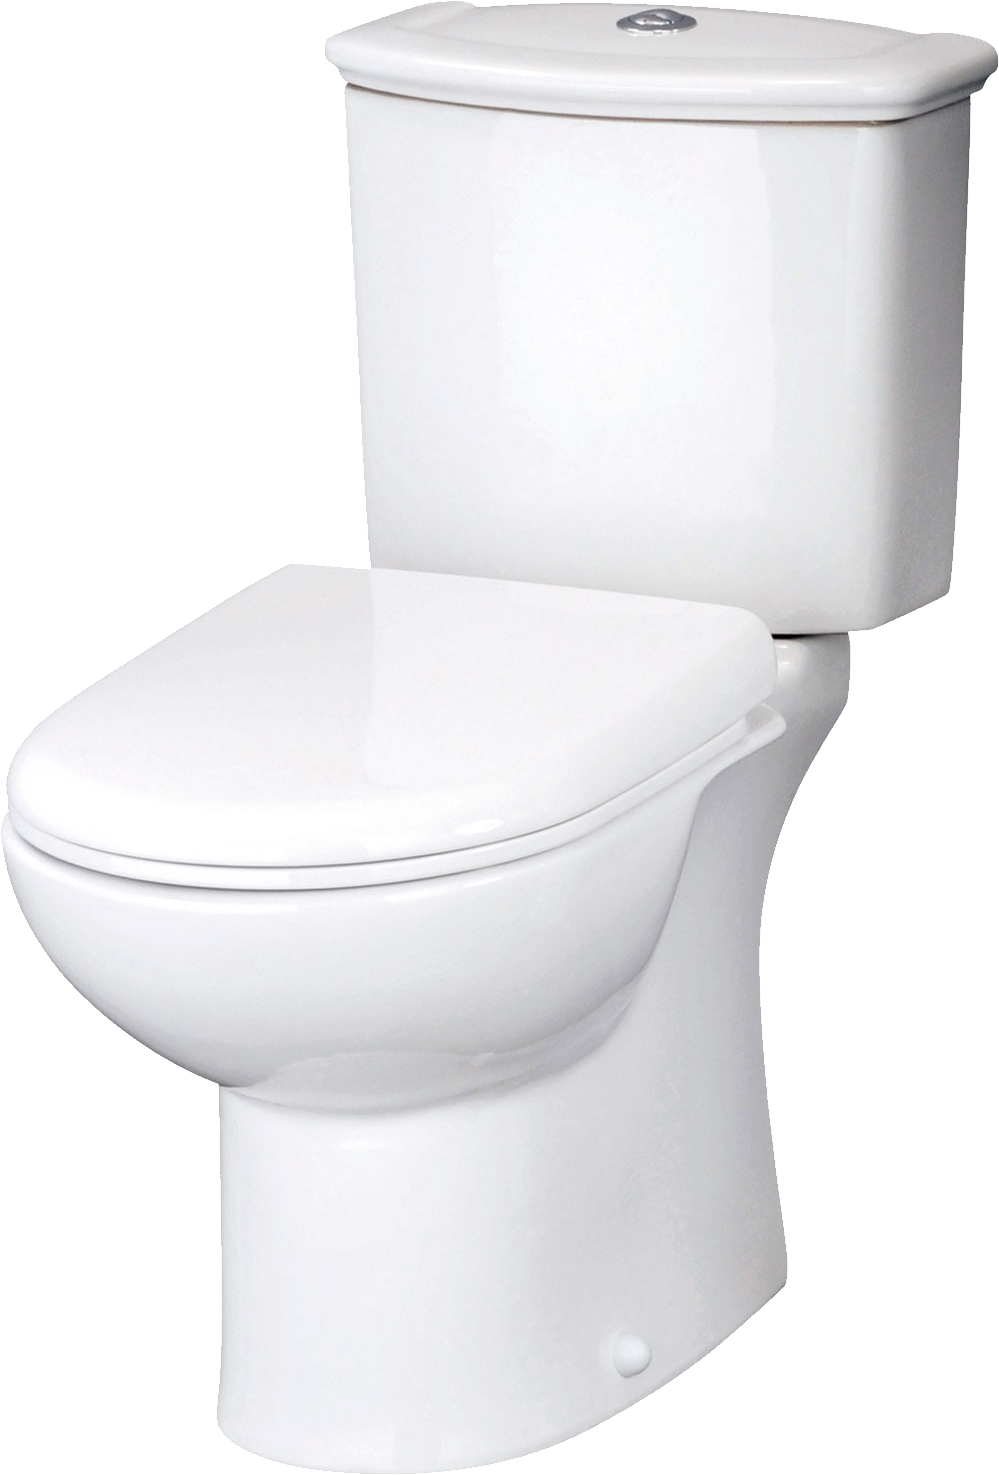 clipart toilet png